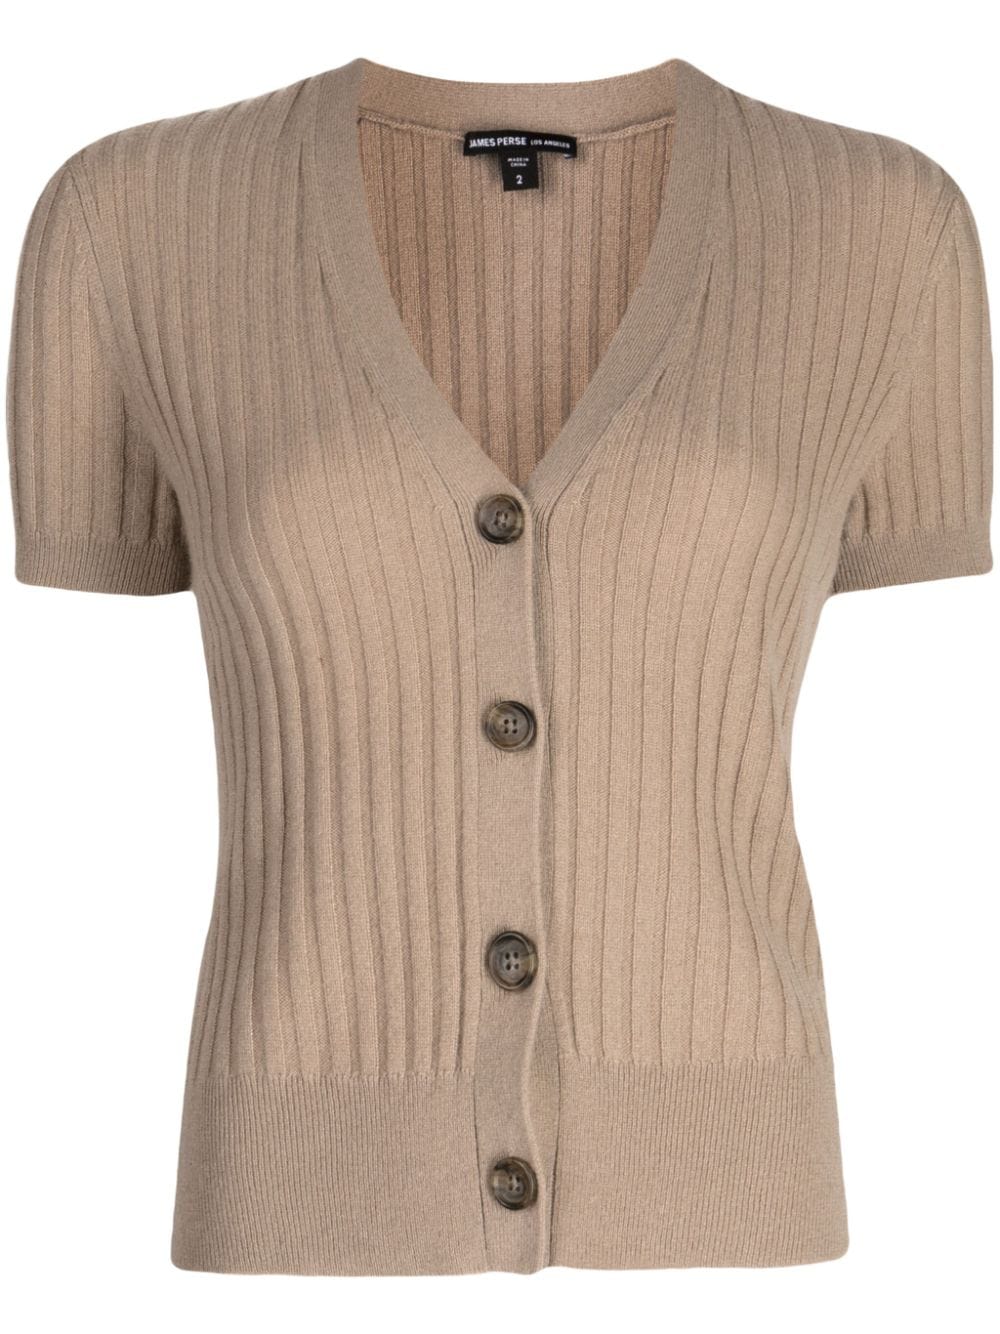 James Perse ribbed cashmere cardigan - Brown